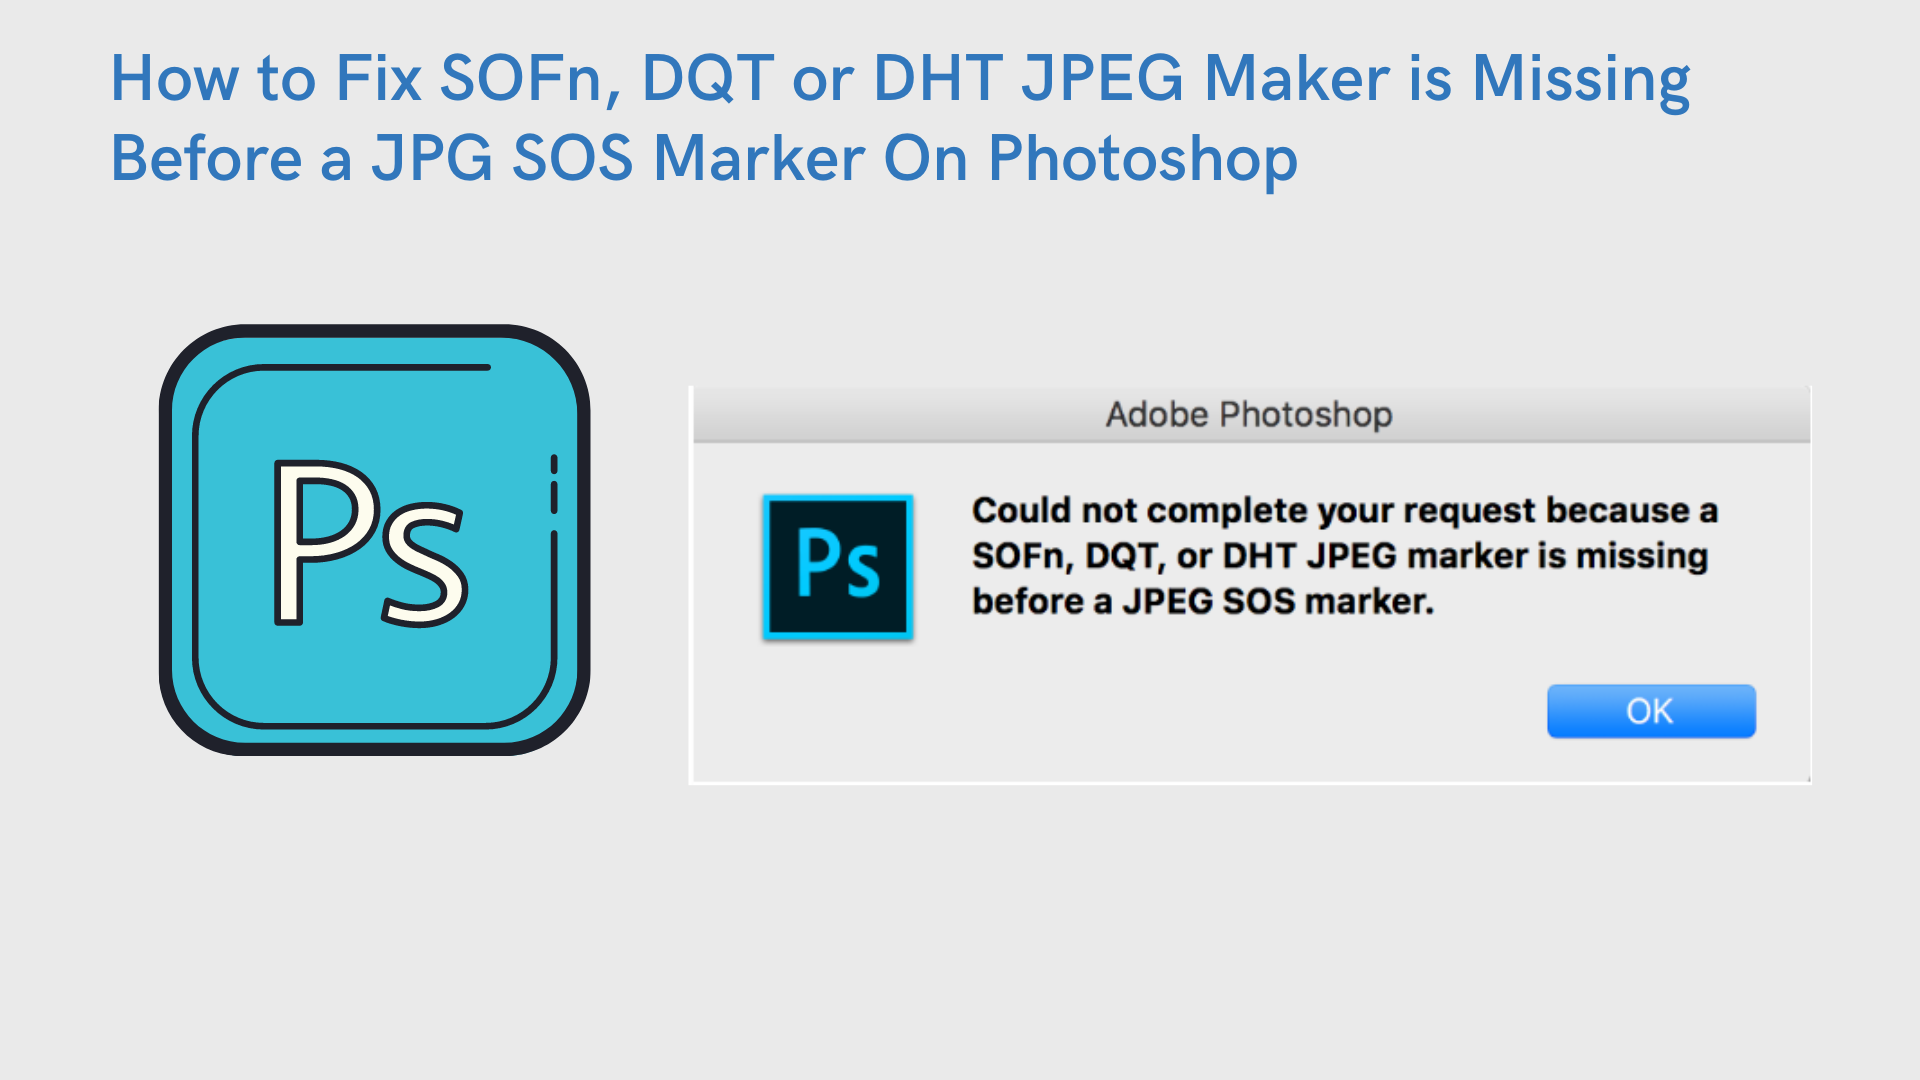 dht jpeg marker is missing photoshop download